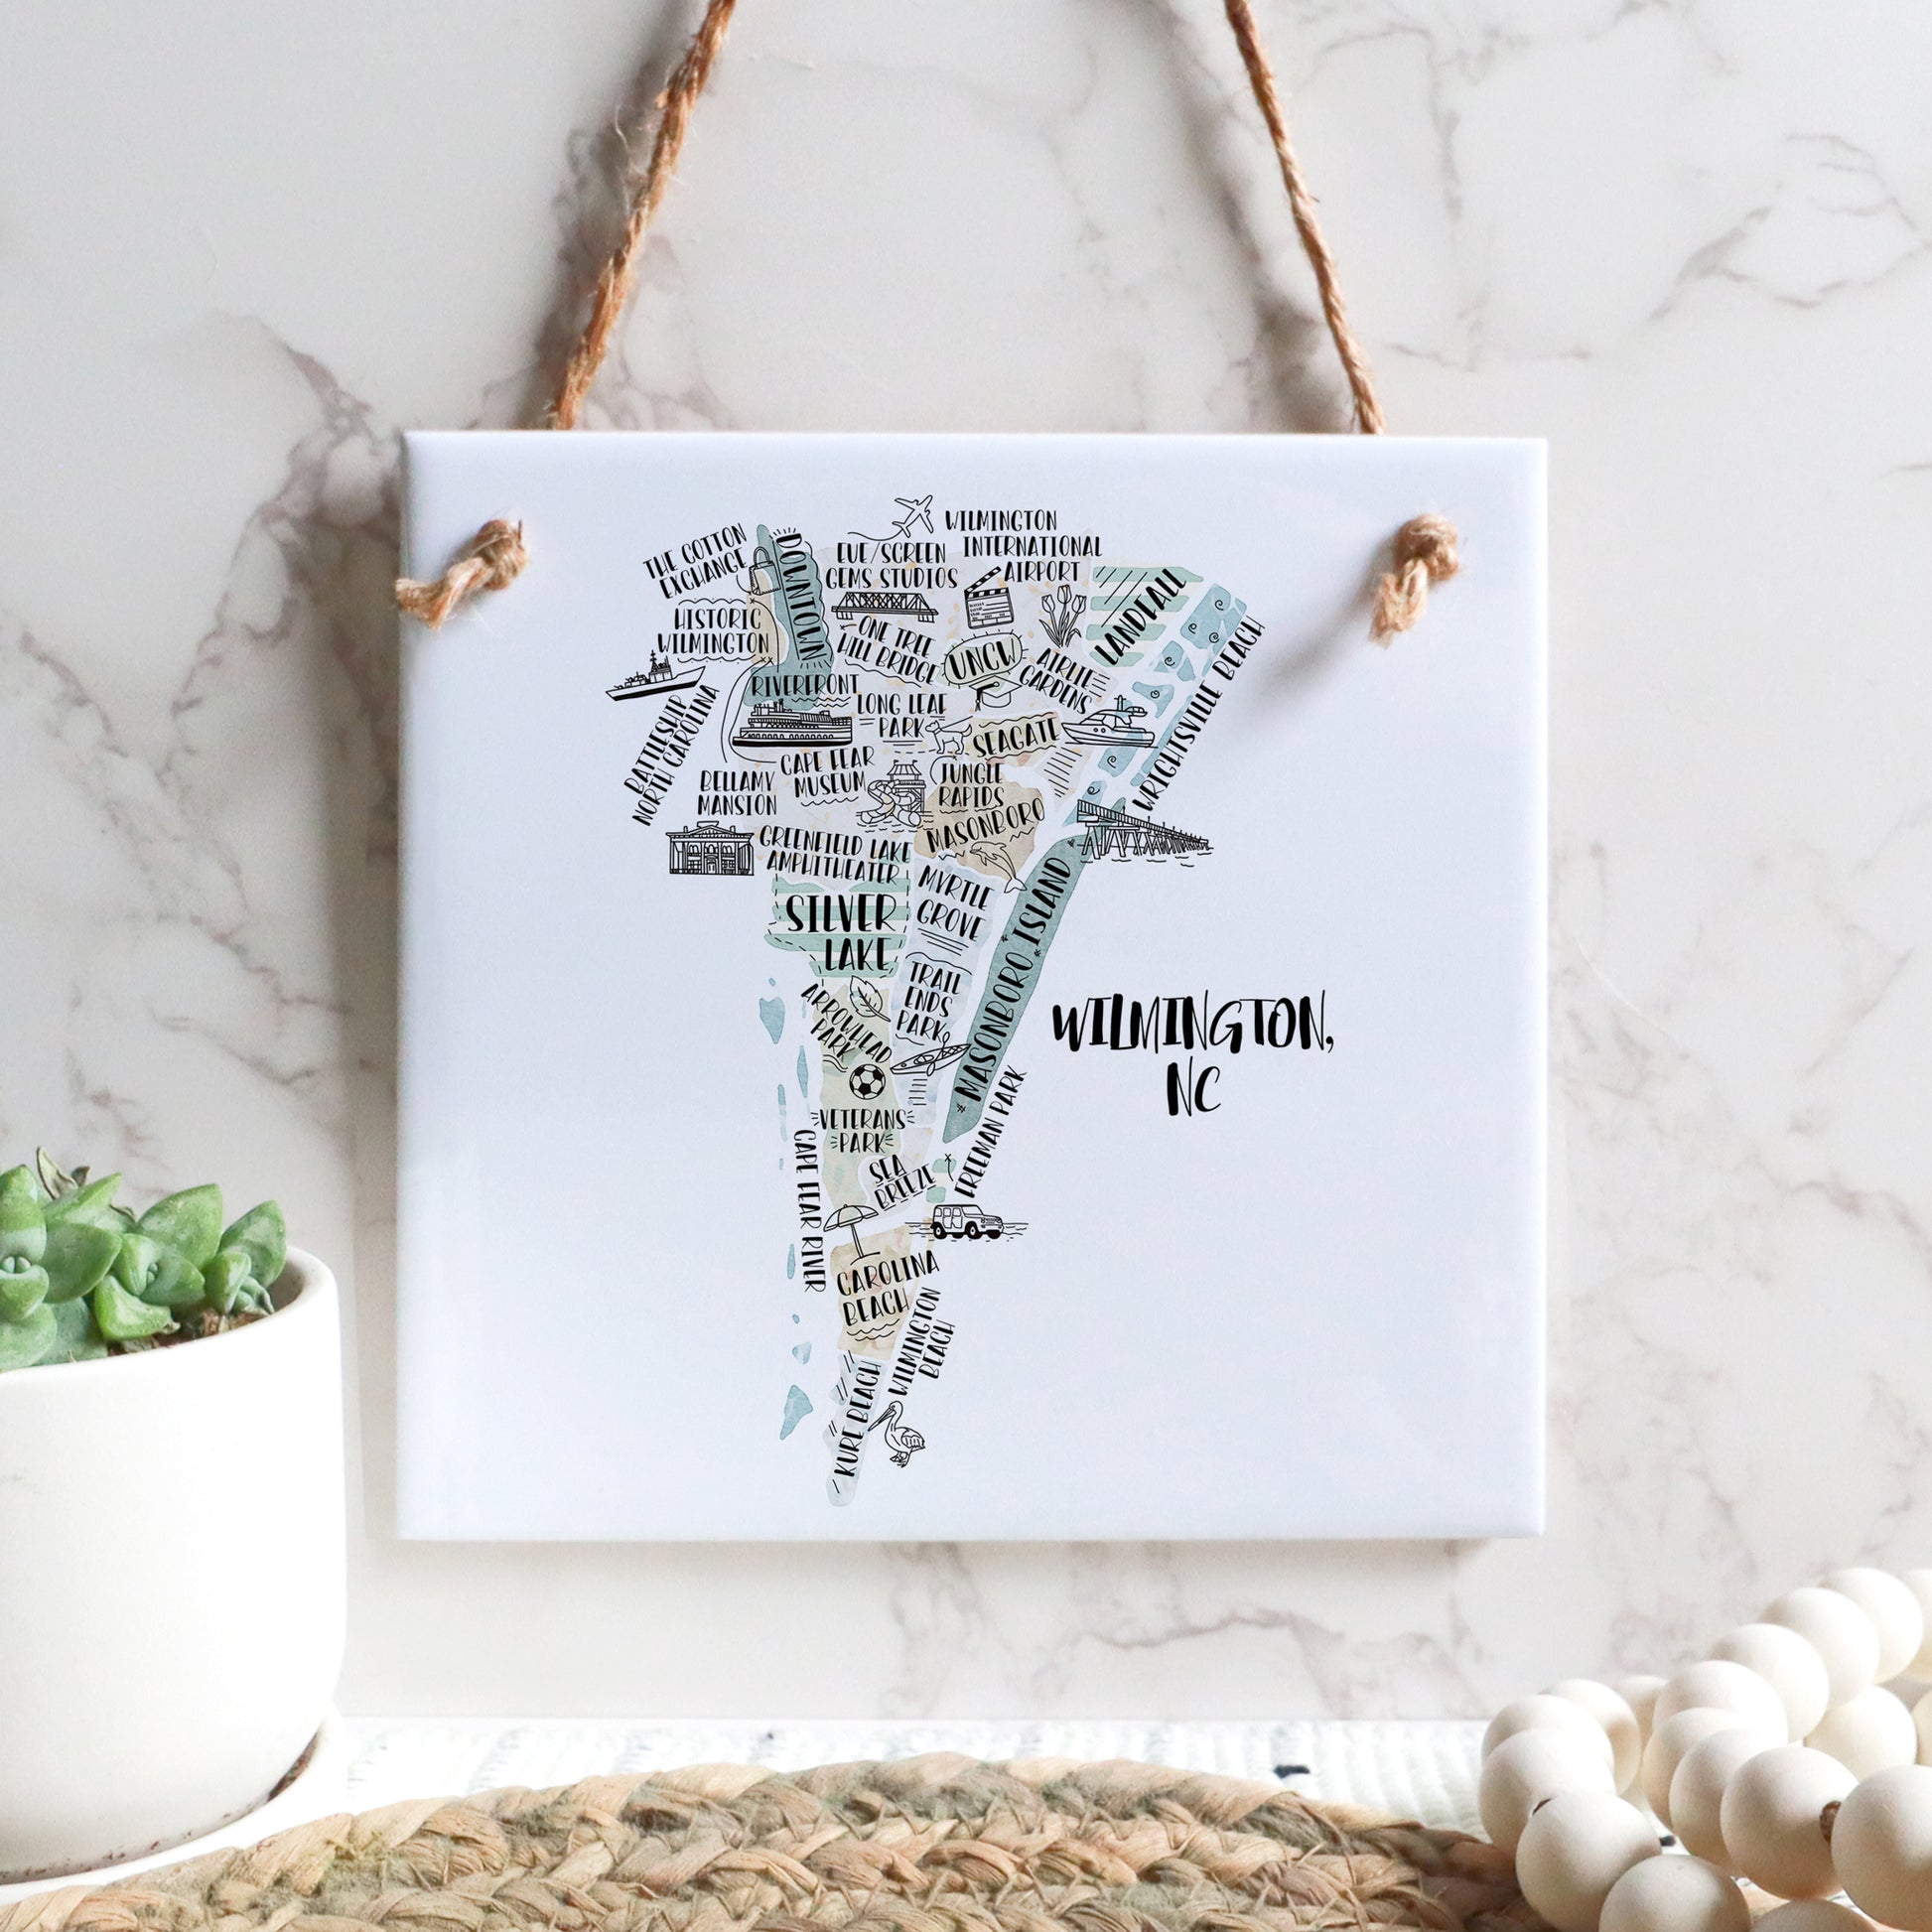 A hand-drawn tourist map of Wilmington North Carolina on a square tile sign hanging on a wall - in the color beige